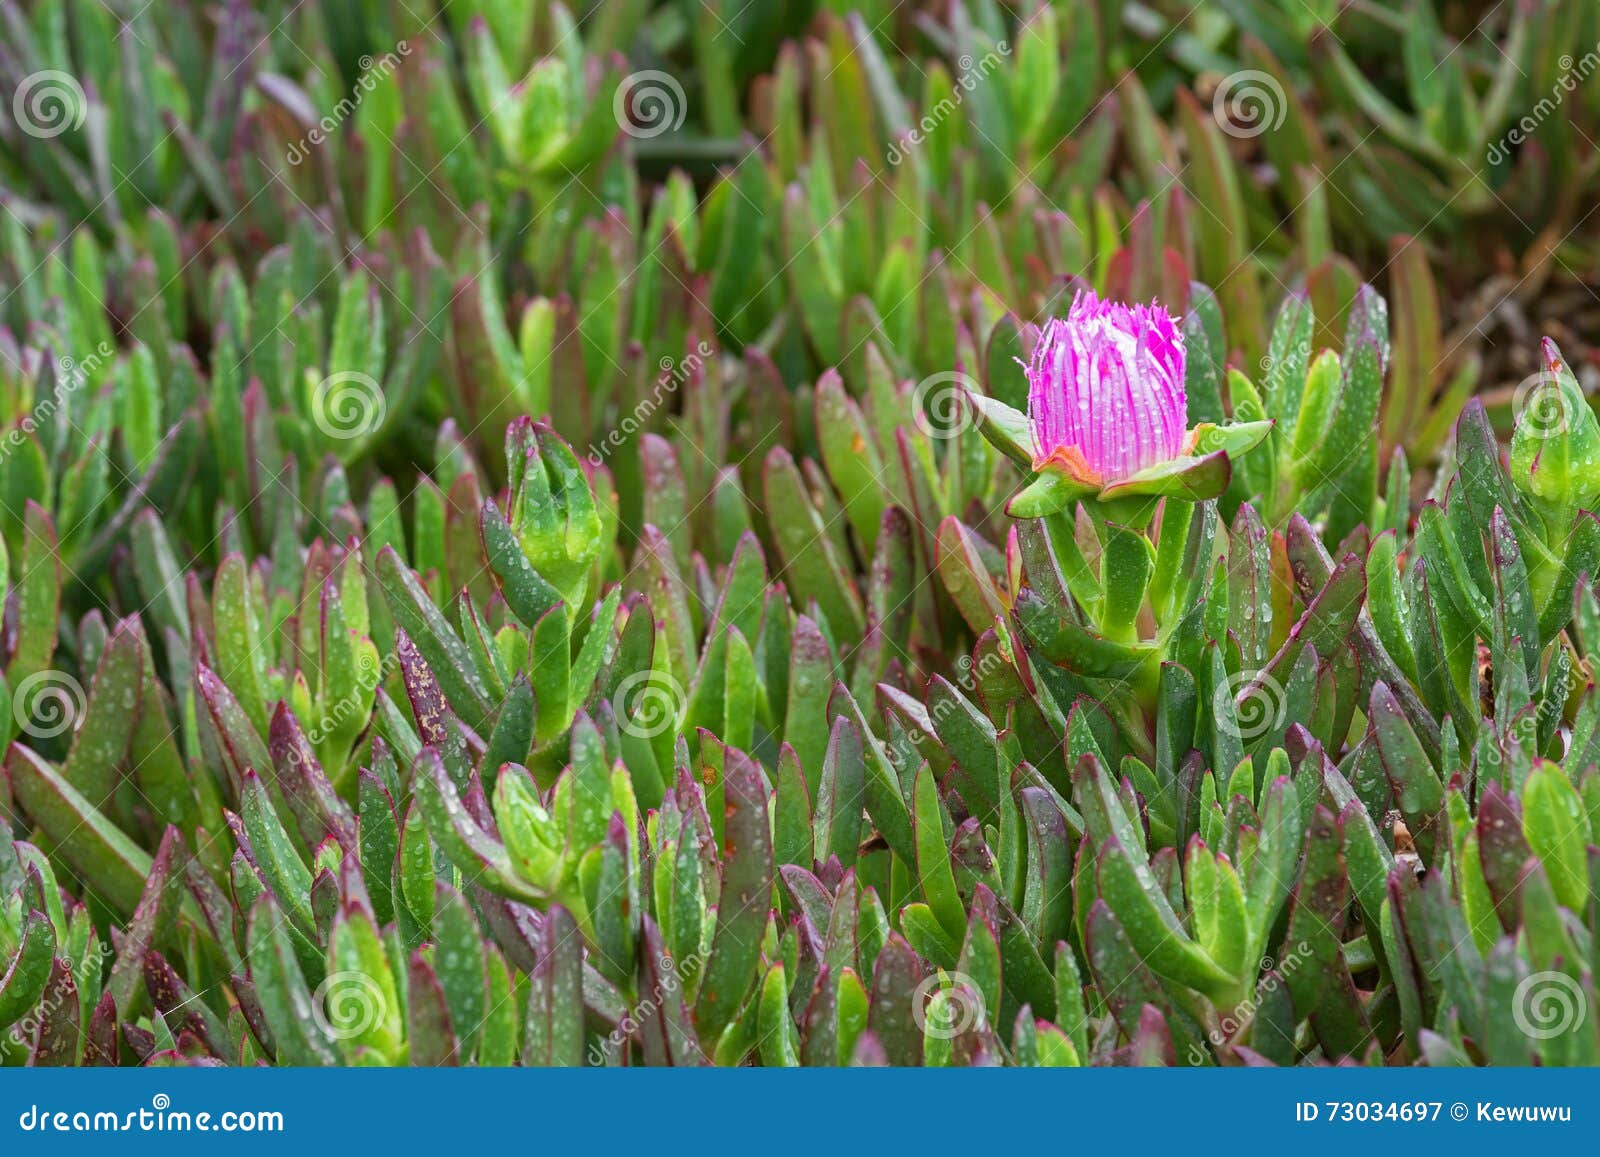 4 226 Bud Ice Plant Photos Free Royalty Free Stock Photos From Dreamstime